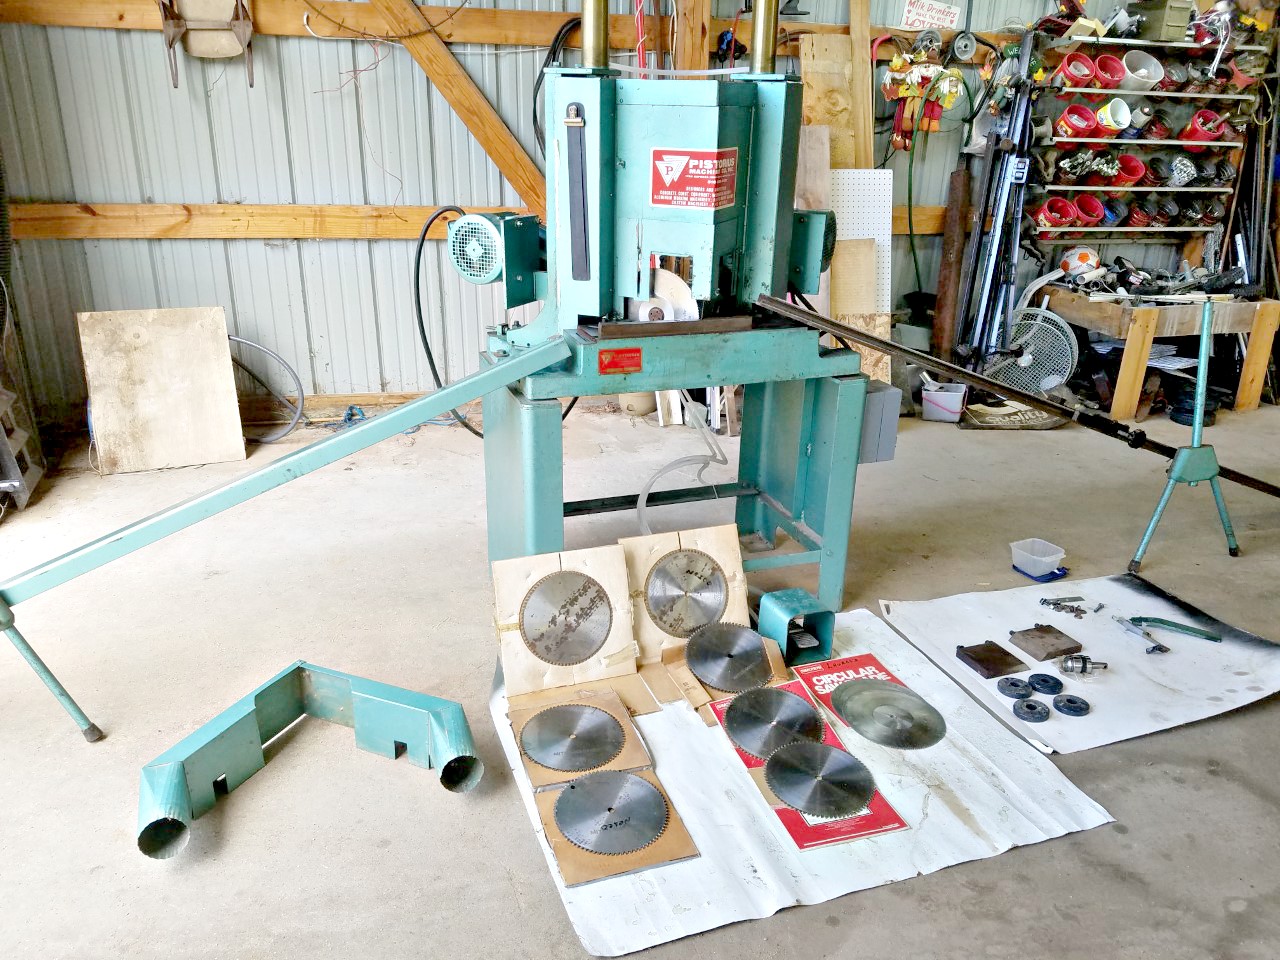 Picture Framing Equipment Lot: Pistorius MN-102 Double Miter Saw & Mitre Mite VN2+1 Vnailer / Joiner / Underpinner (Used) Item # AGFS-76 (Michigan)